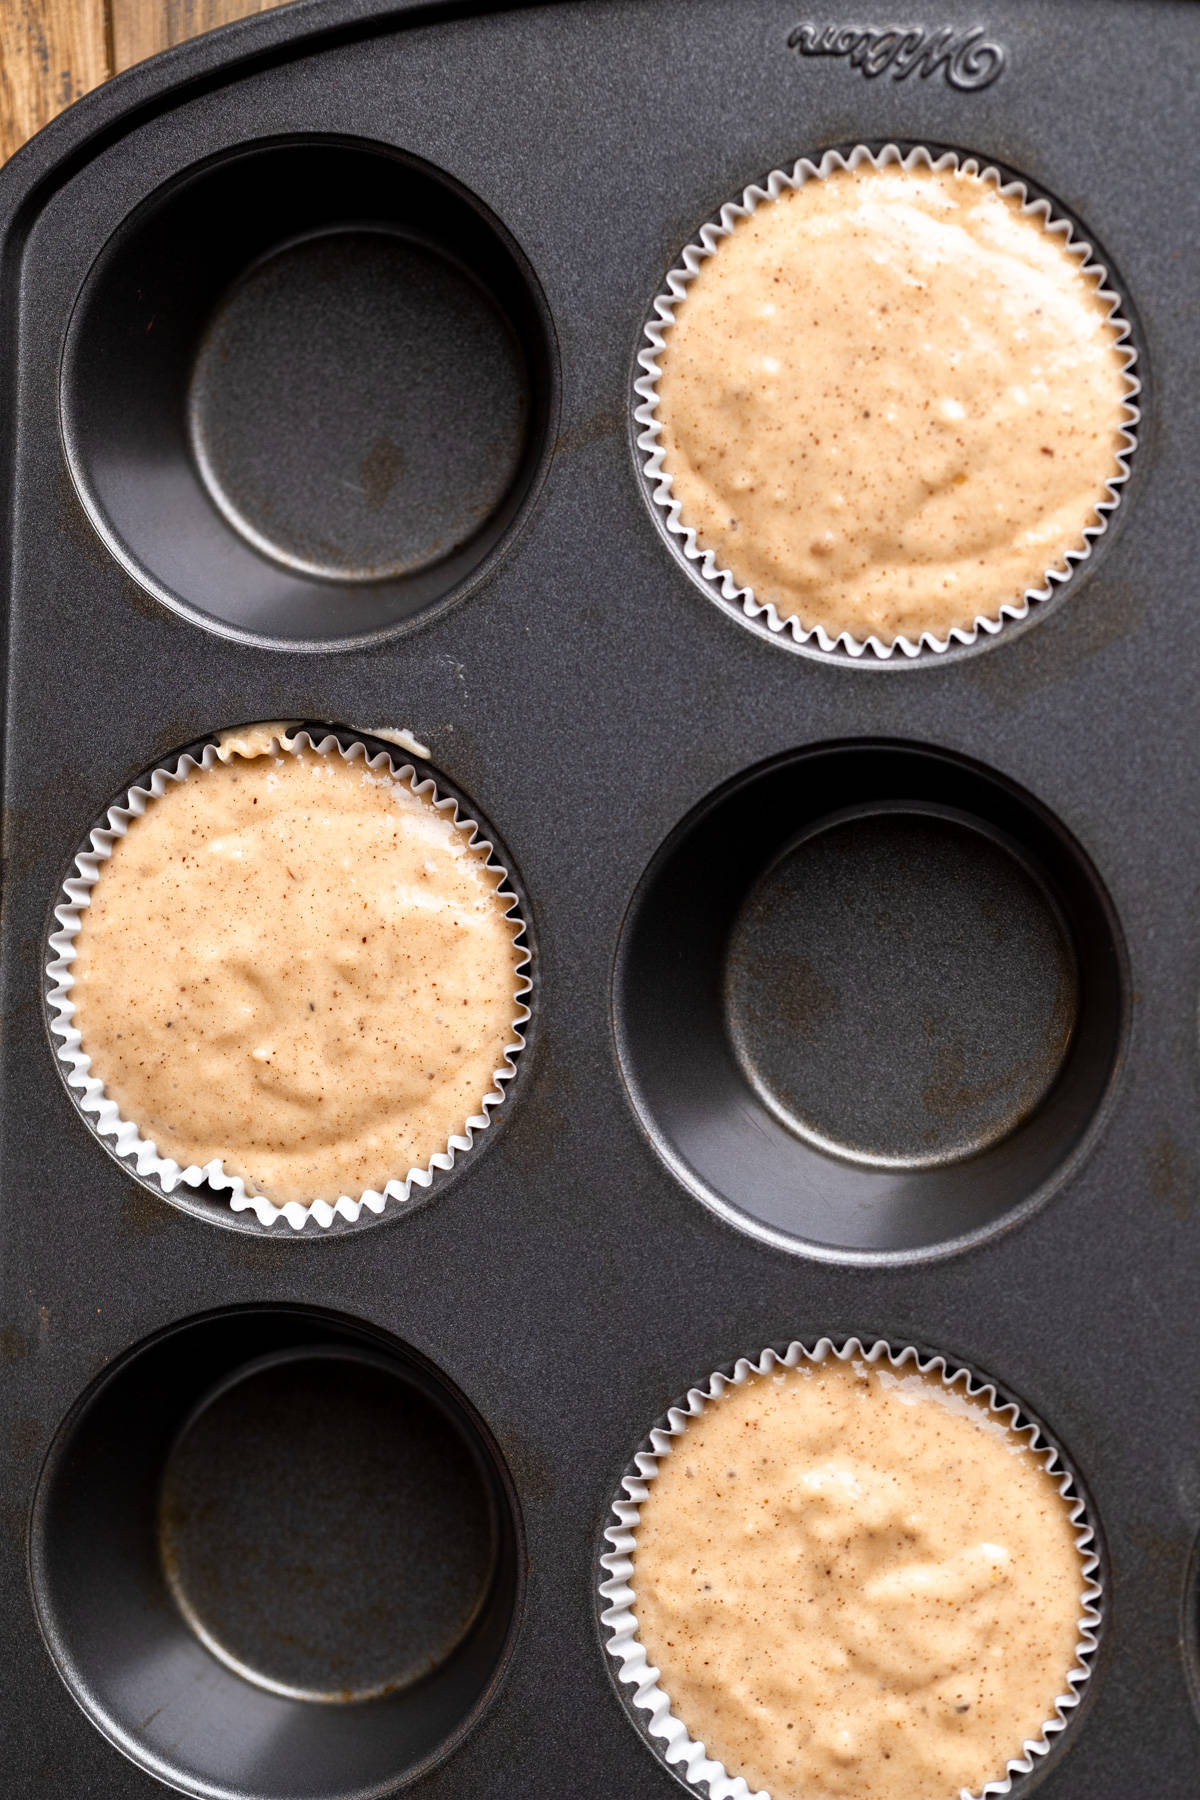 Muffin batter in a pan.